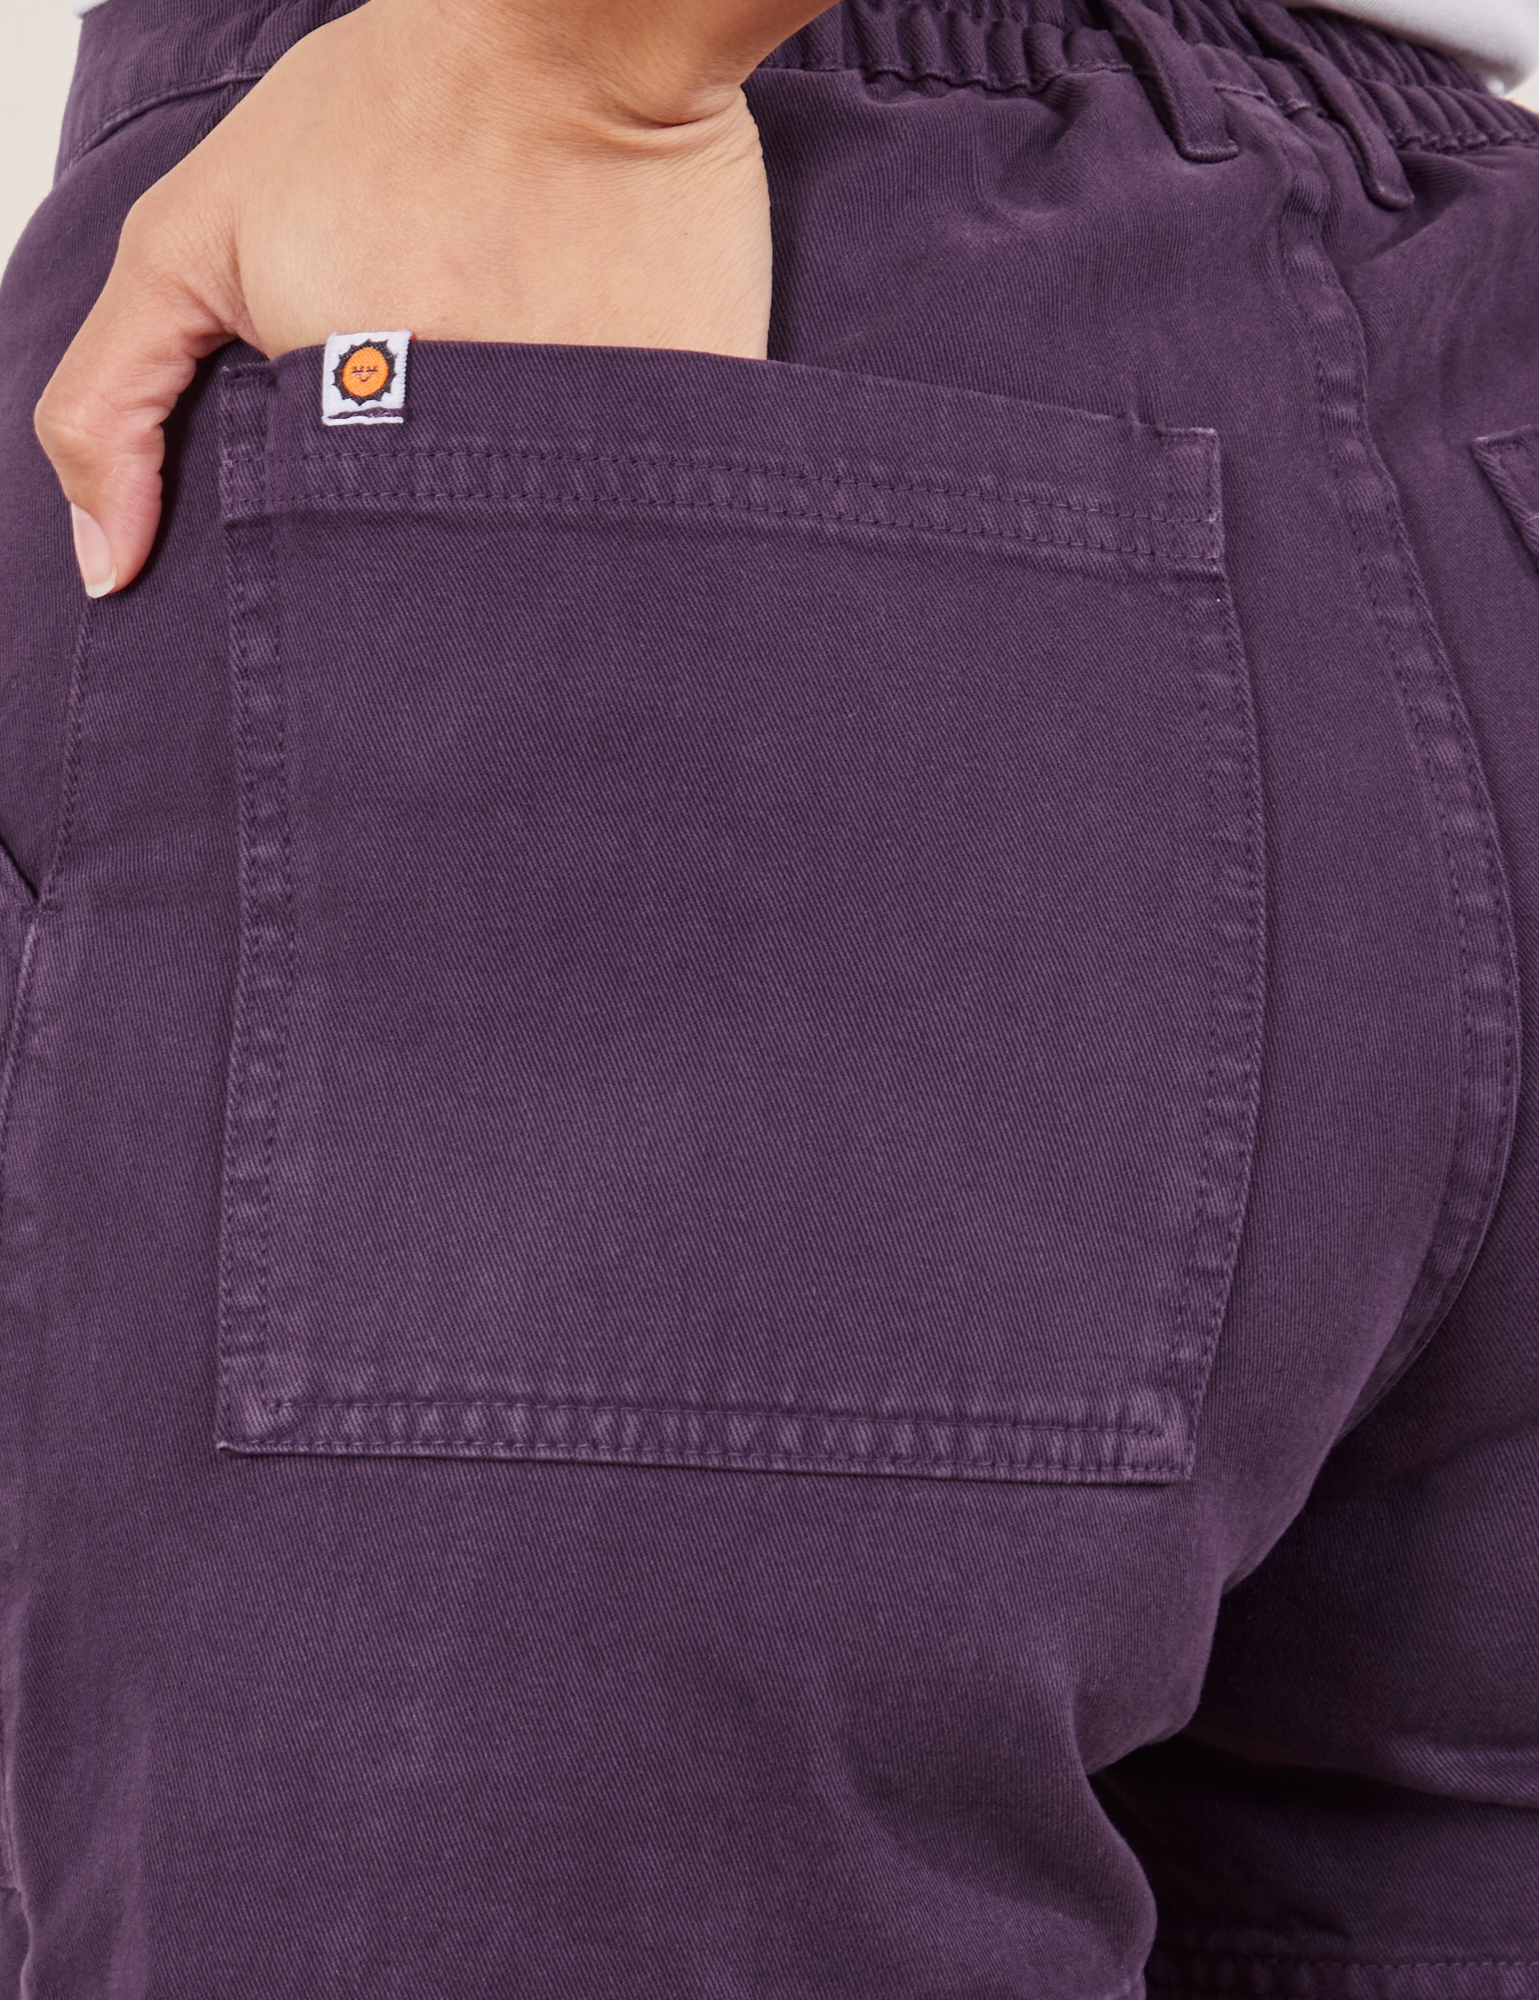 Classic Work Shorts in Nebula Purple back pocket close up. Tiara has her hand in the pocket.